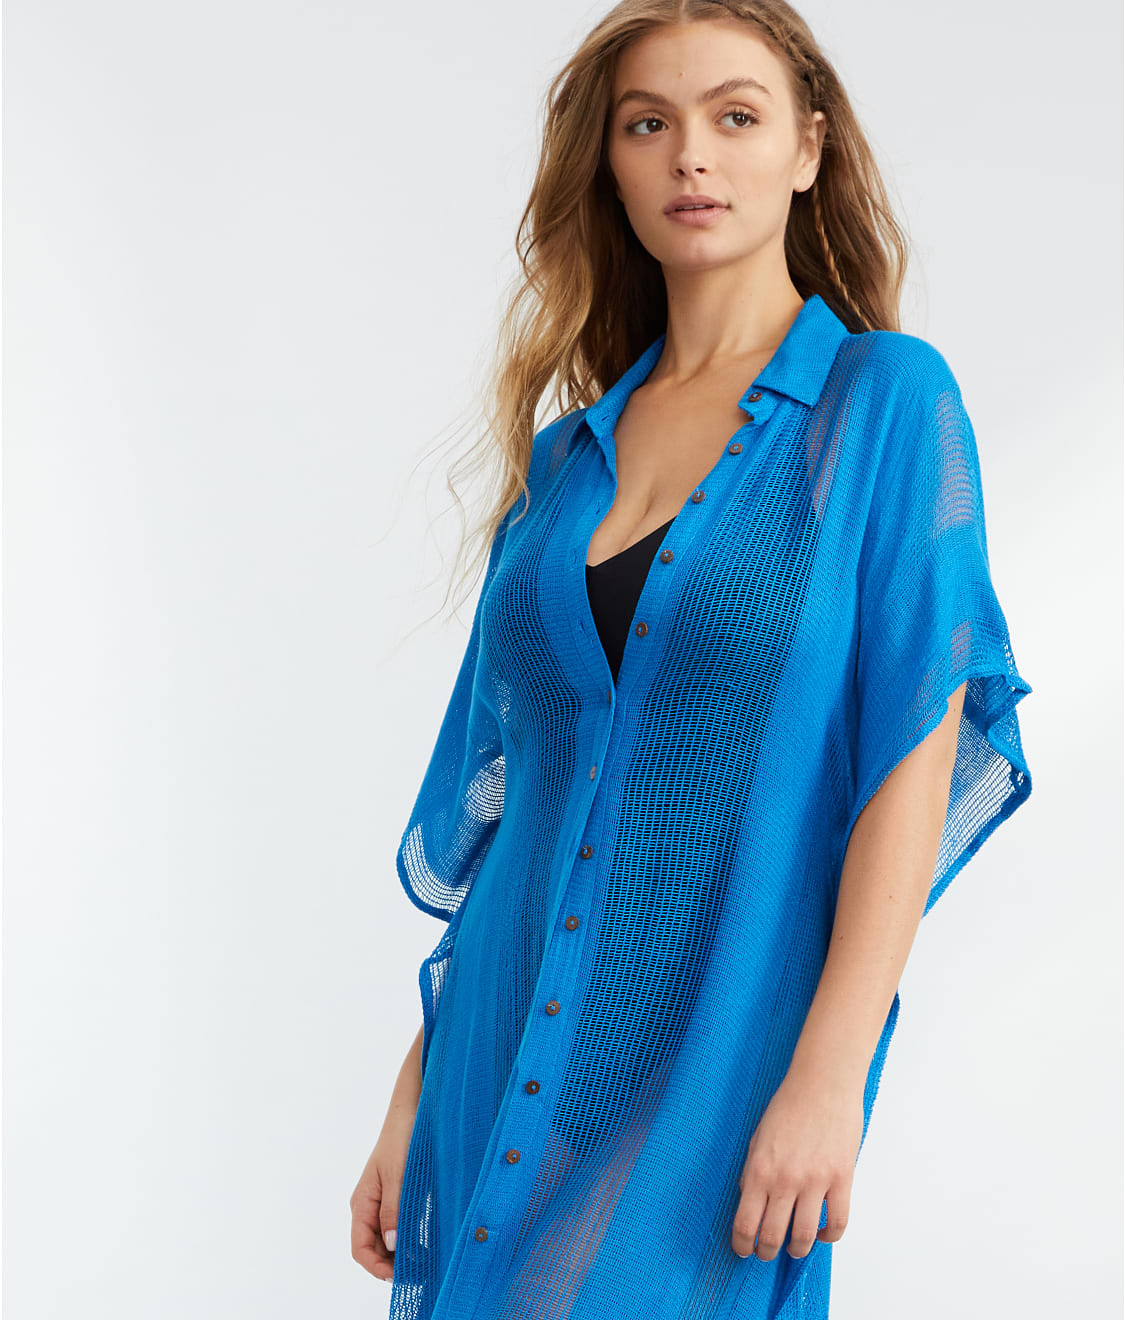 Sunsets: Shore Thing Tunic Cover-Up 181